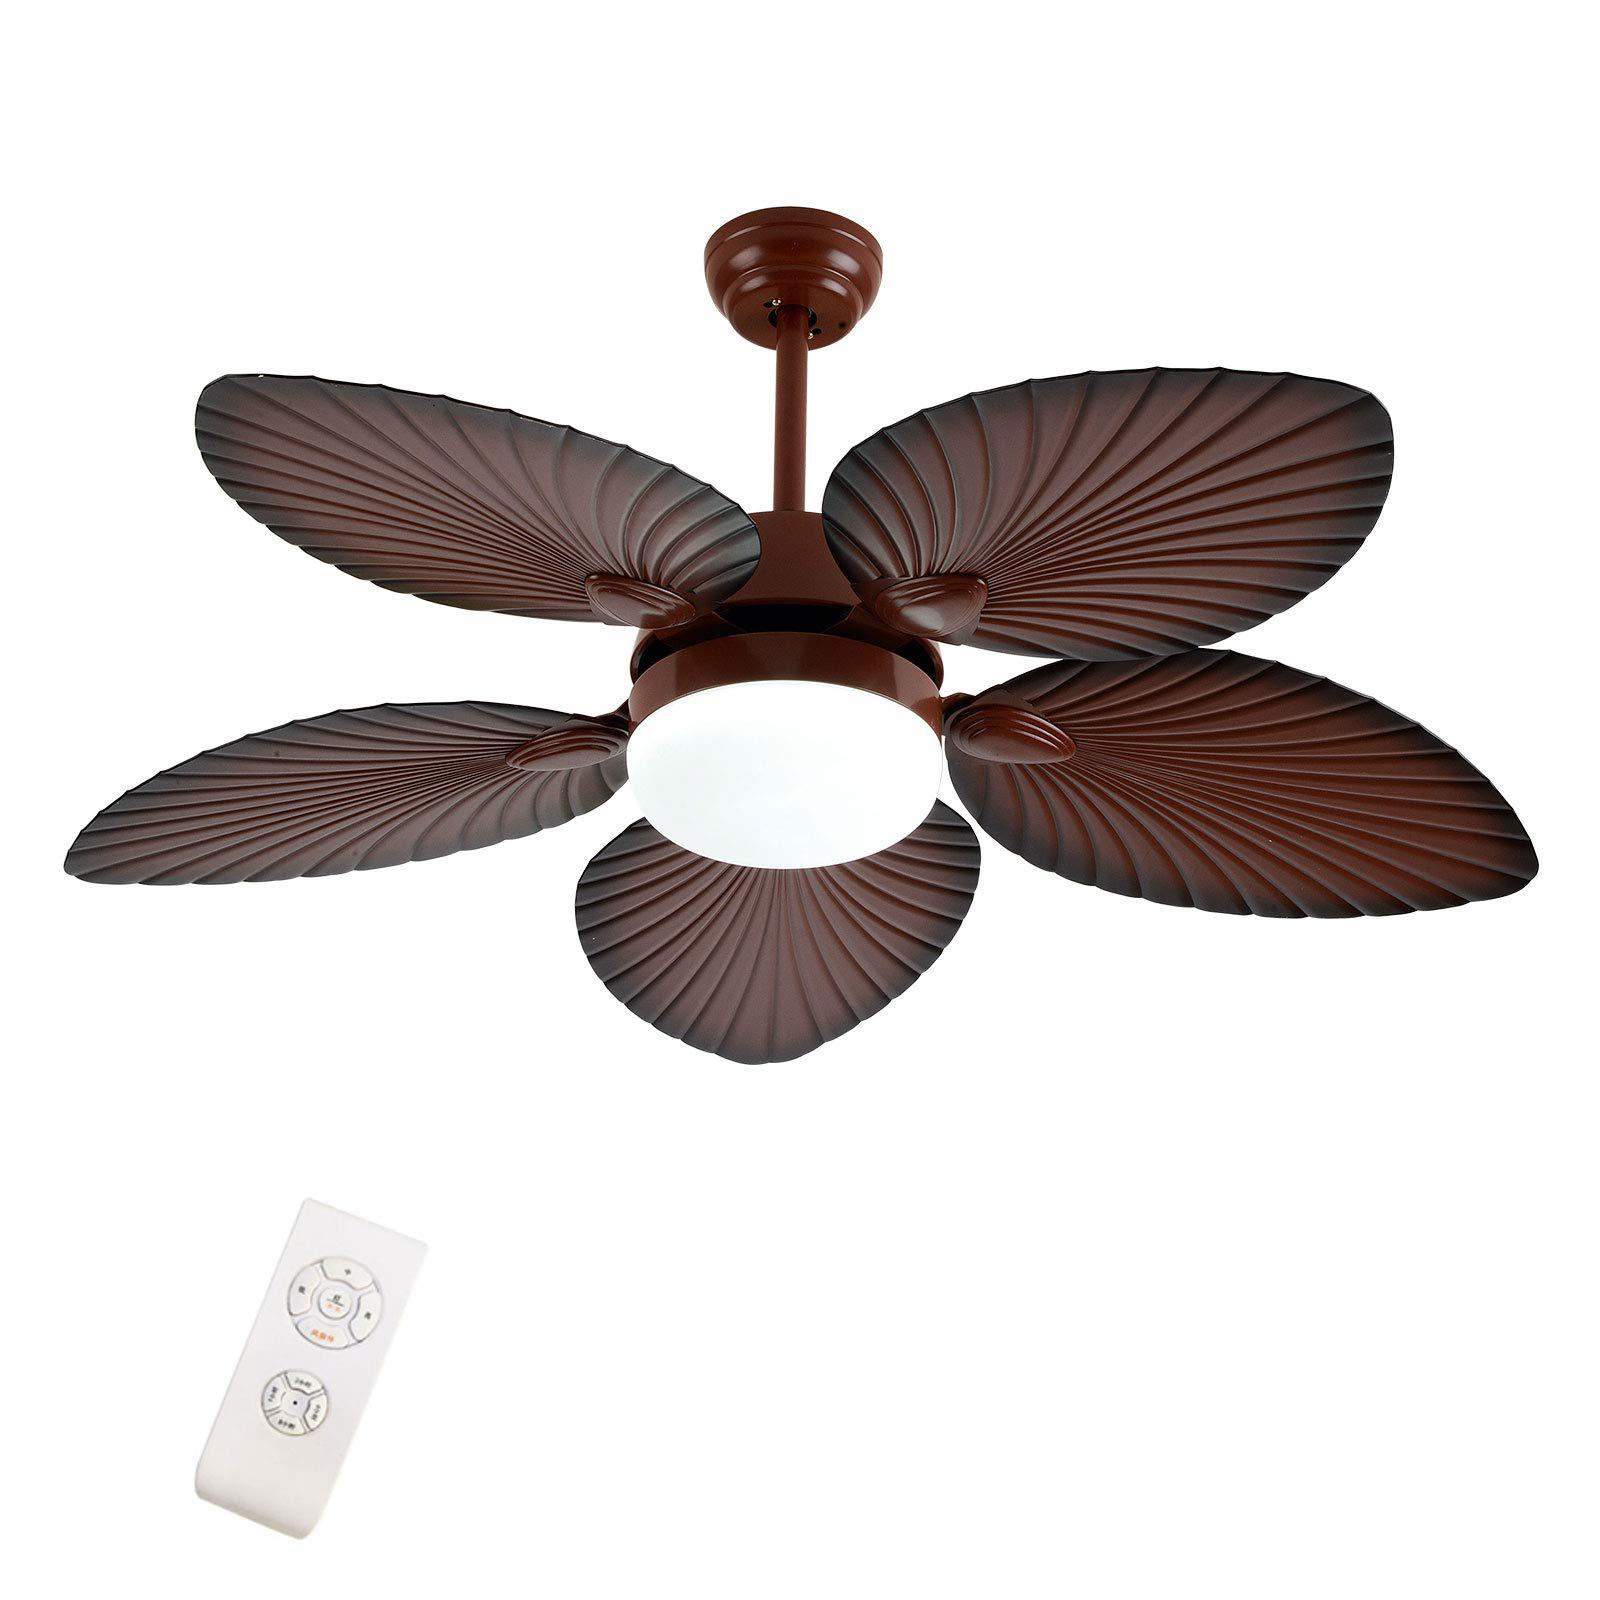 loyalheartdy tropical ceiling fan with led light kit remote control, 5 abs palm leaf blades, 3 speed & 3 lighting colors & smart timing, i